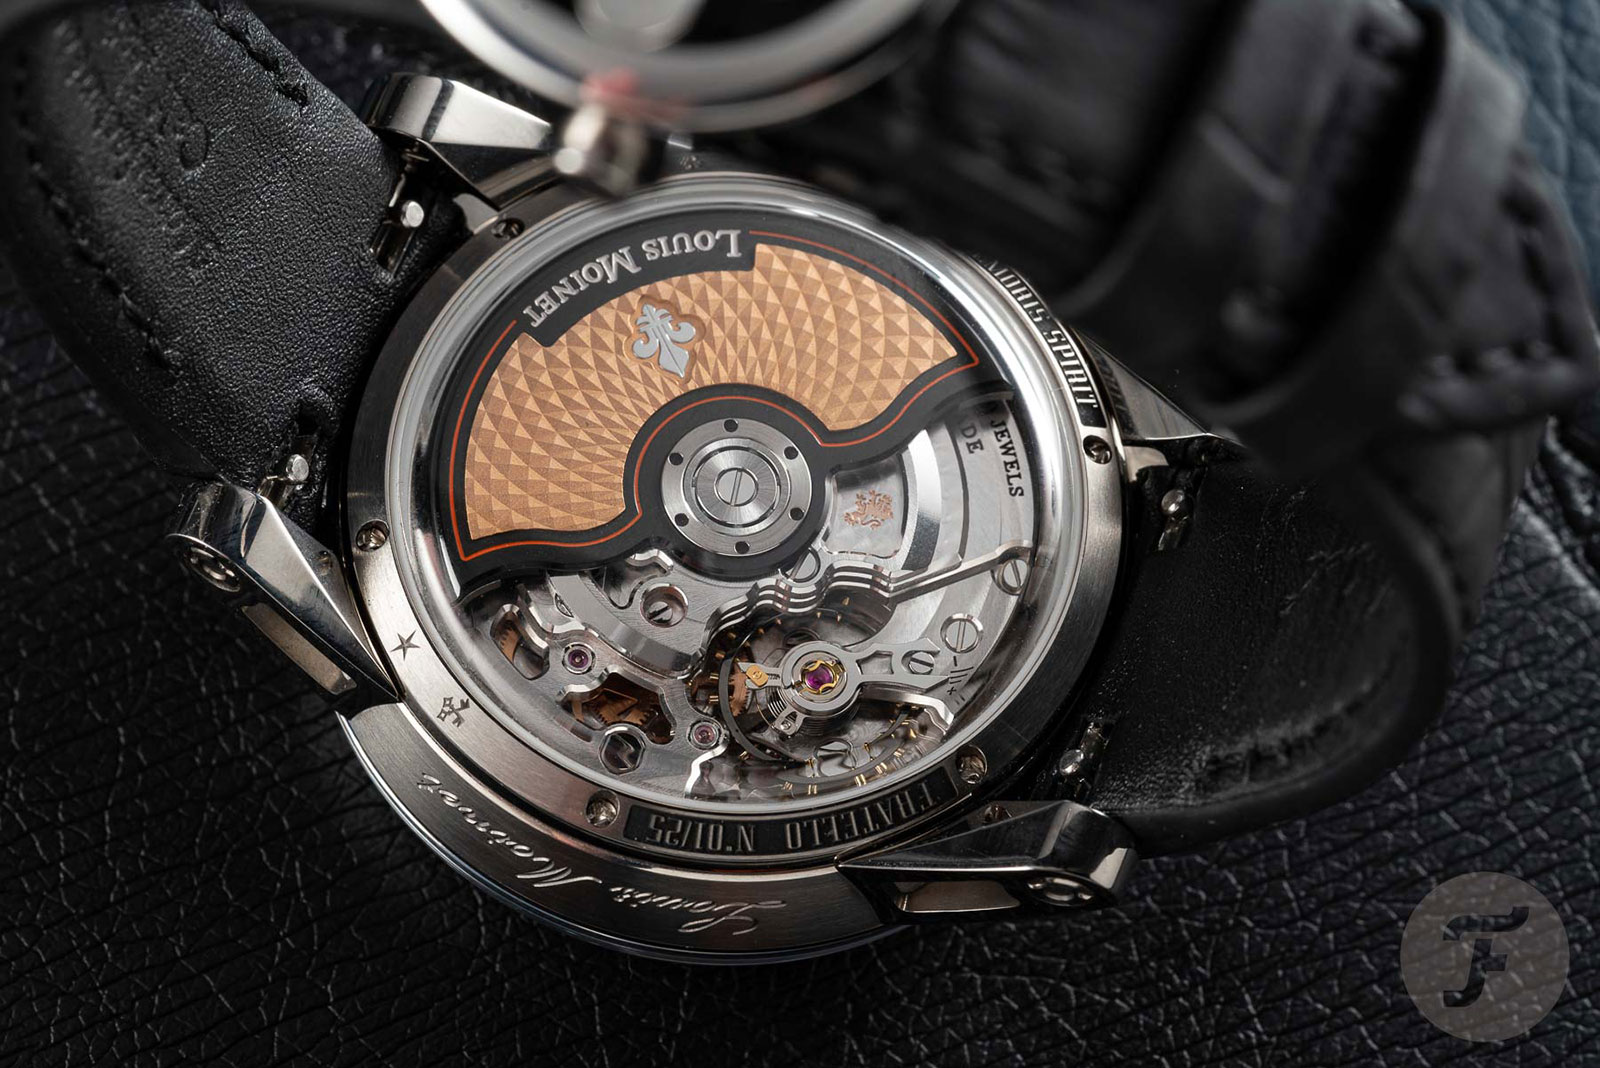 Louis Moinet: 94 watches with prices – The Watch Pages